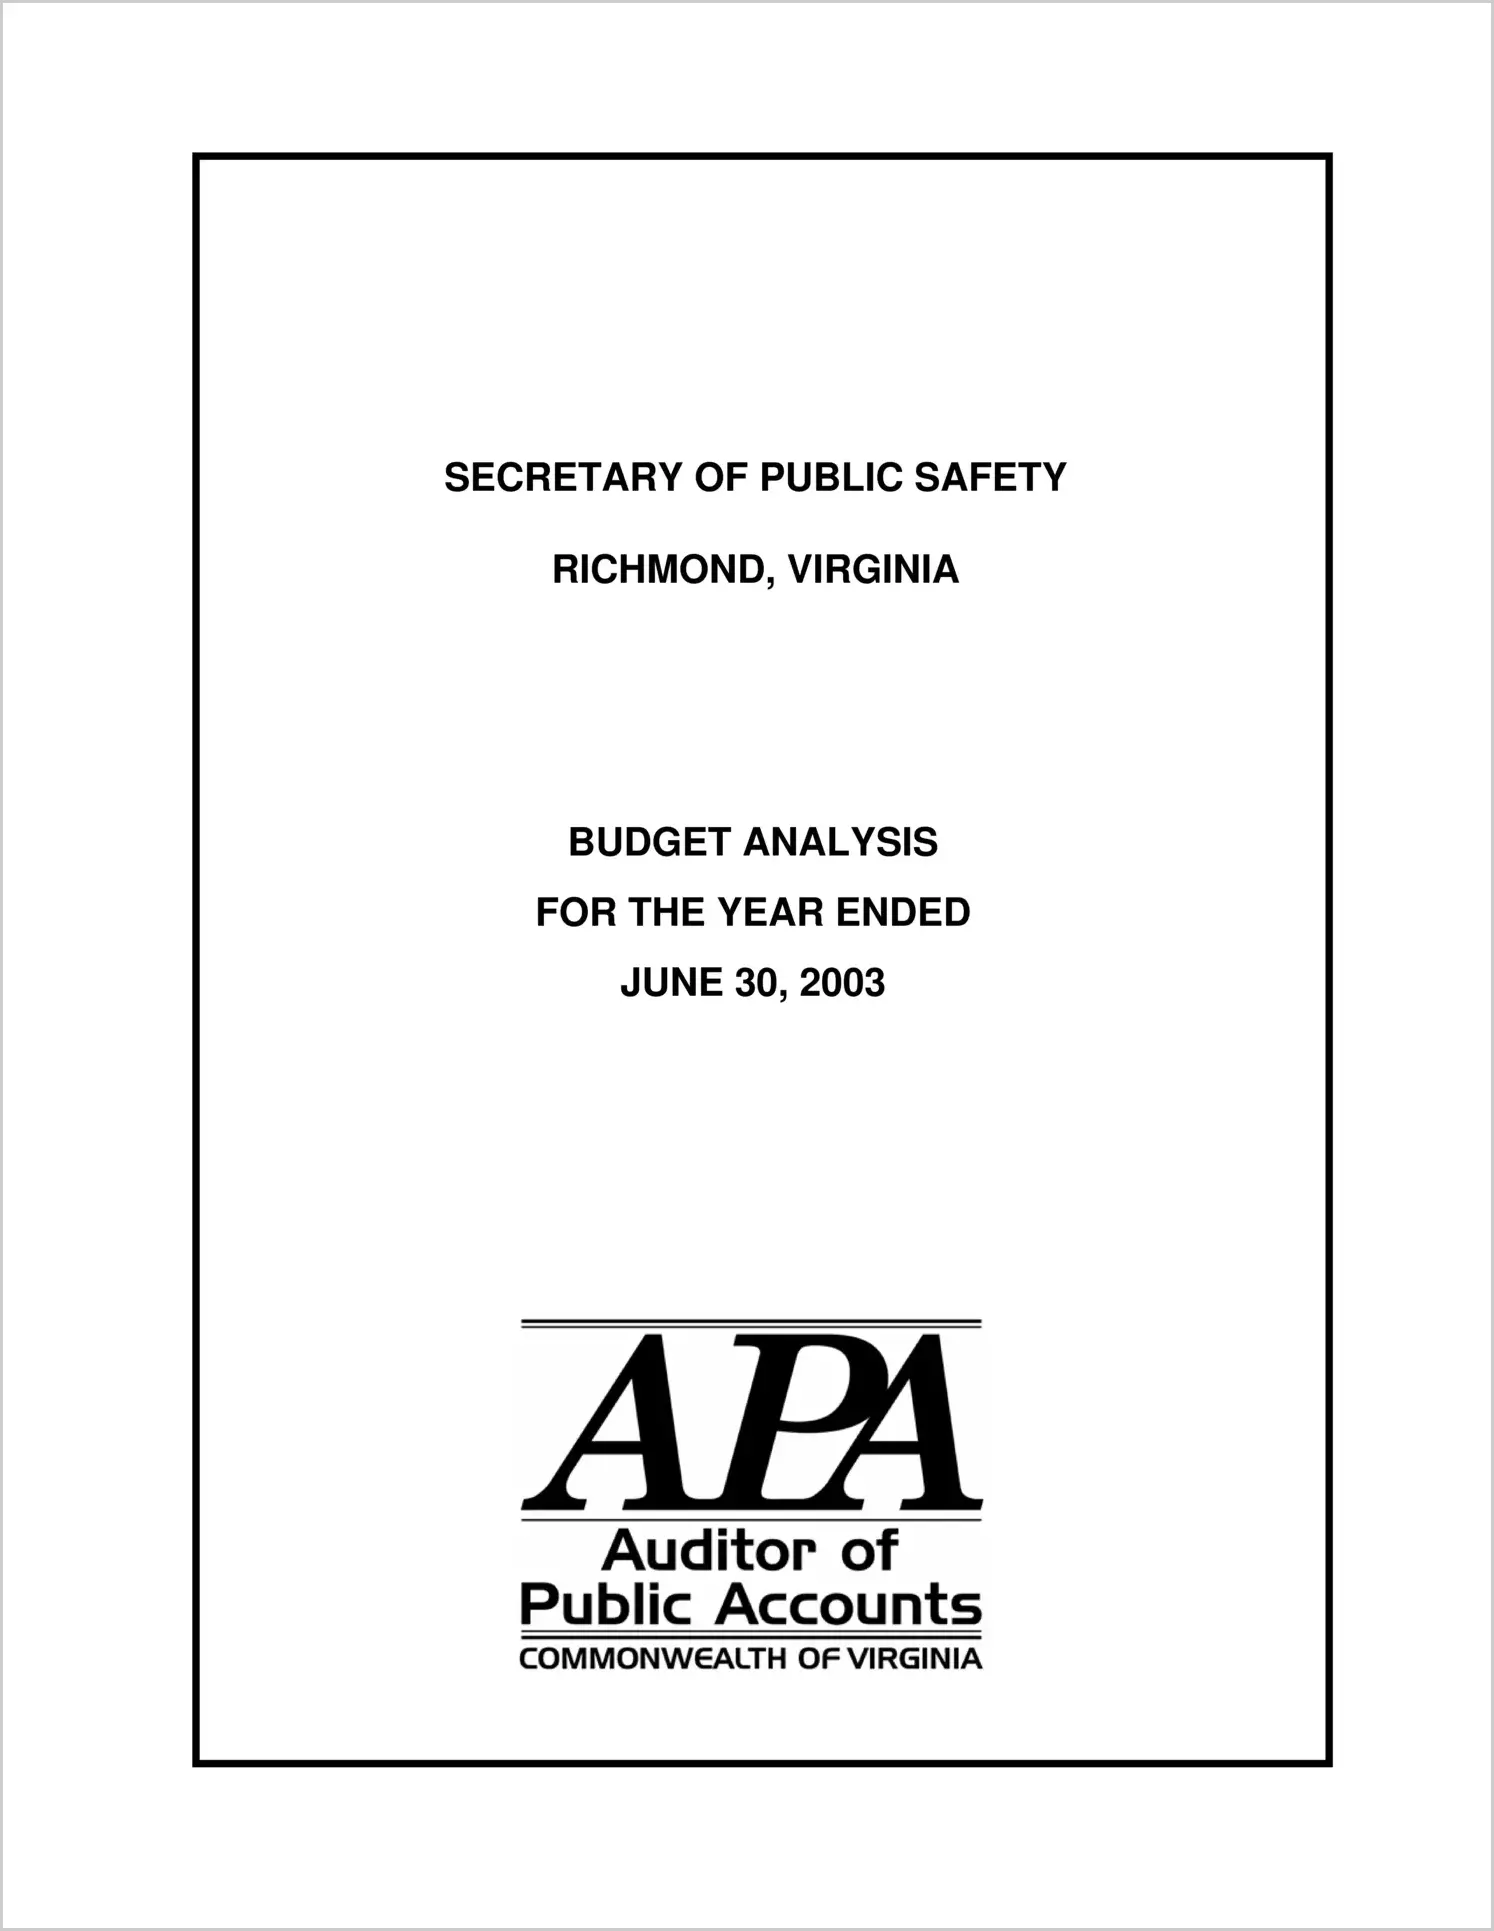 Special ReportSecretary of Public Safety Budget Analysis For the Year Ended June 30, 2003